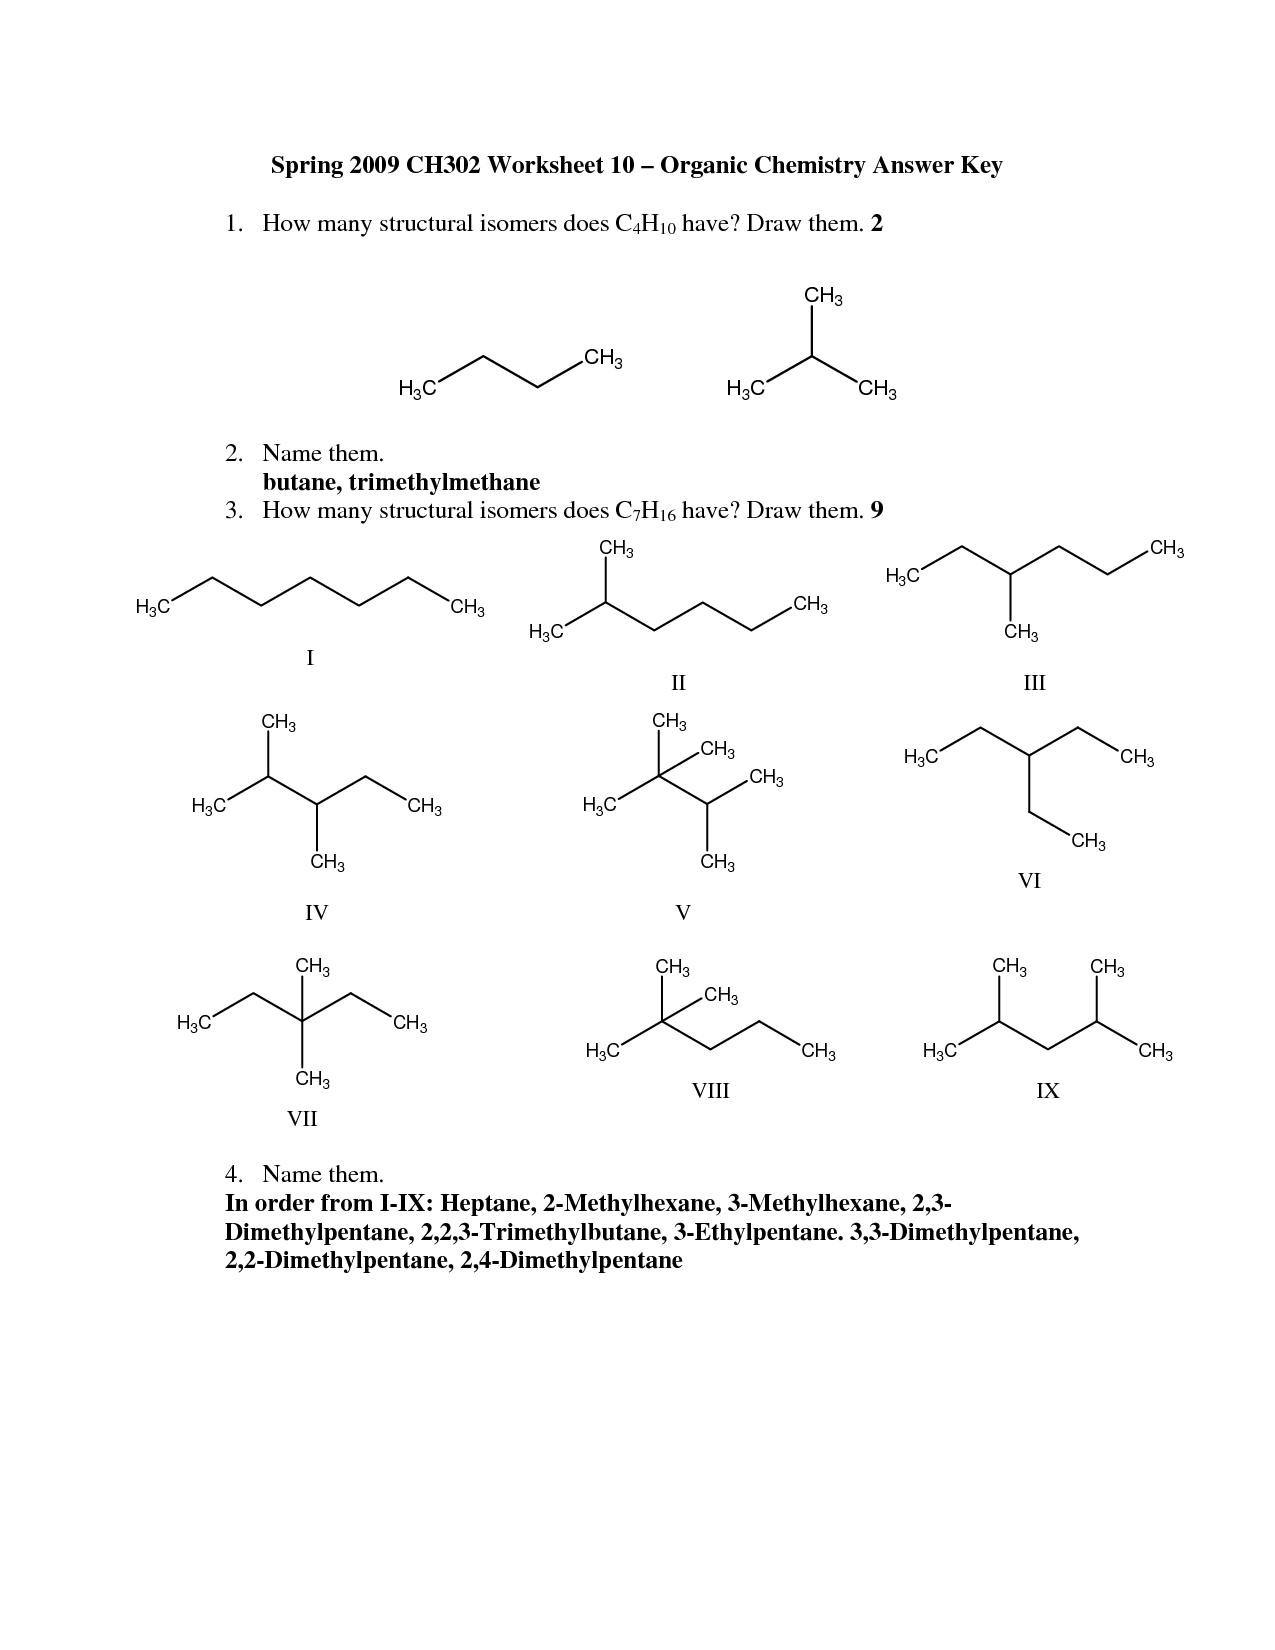 Organic Chemistry Worksheets Answers Image